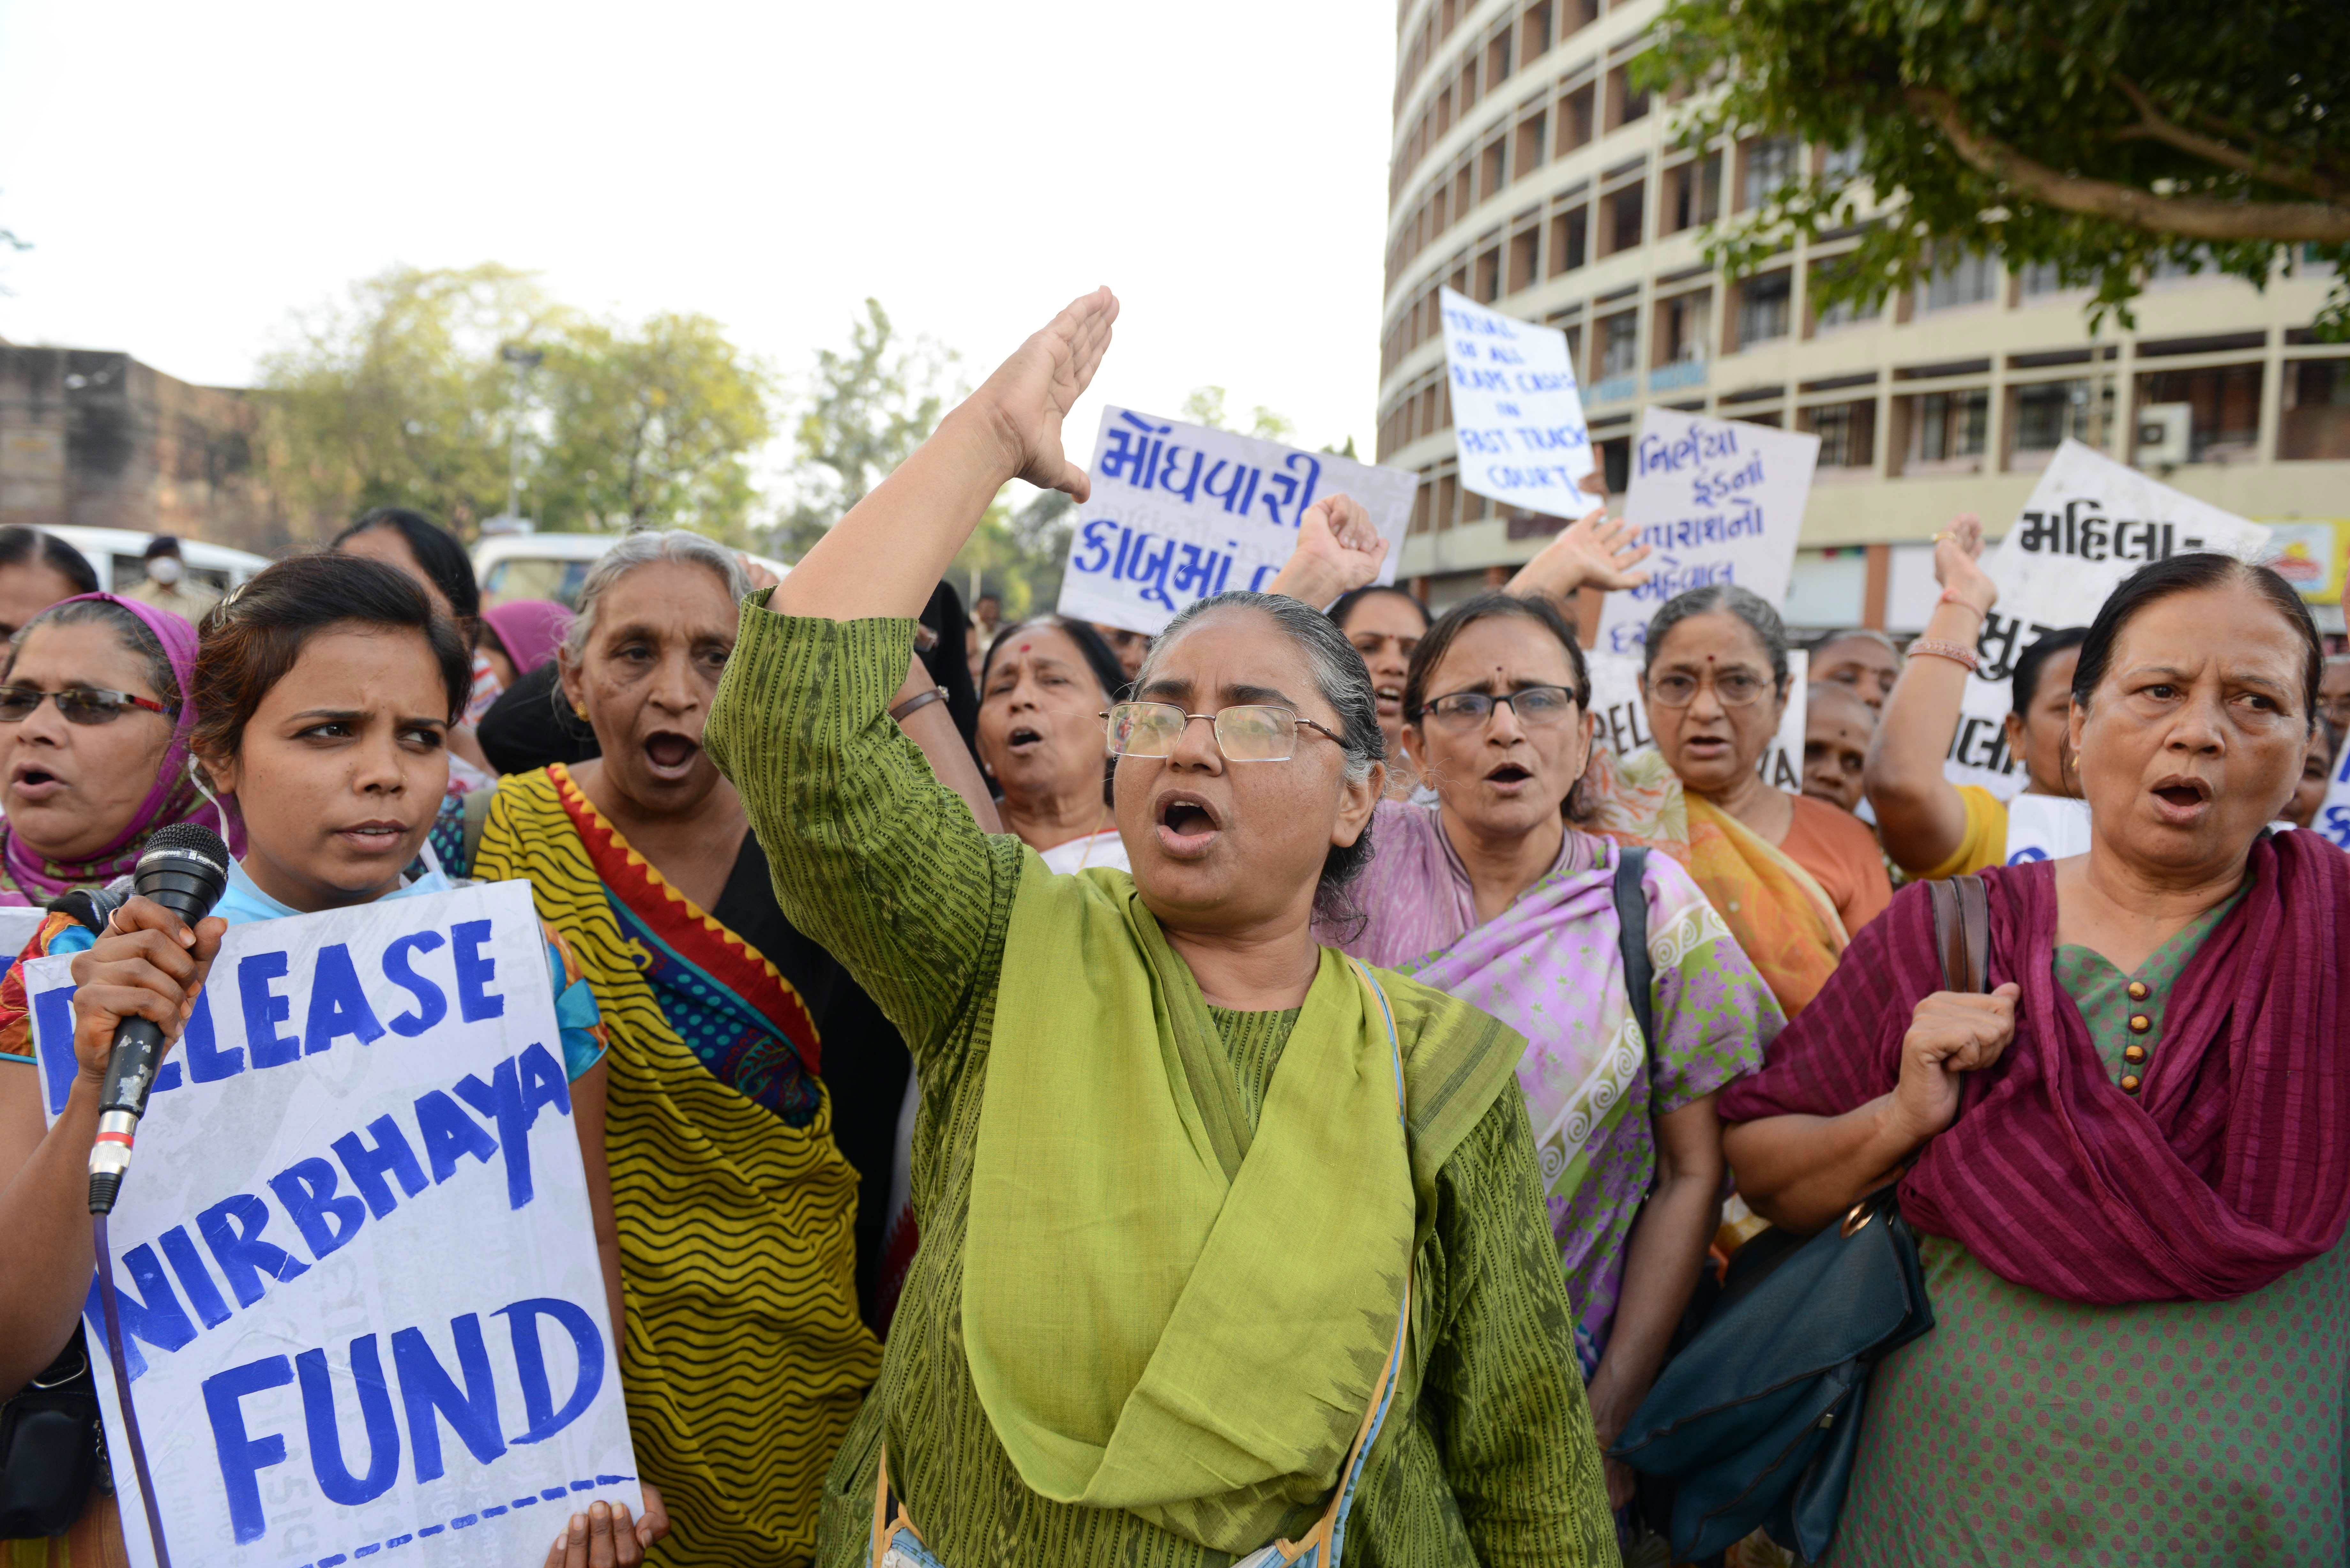 Demonstrators in Ahmedabad call for women's equality and for the severe punishment of convicted rapists, on the eve of International Women's Day. Photo: AFP